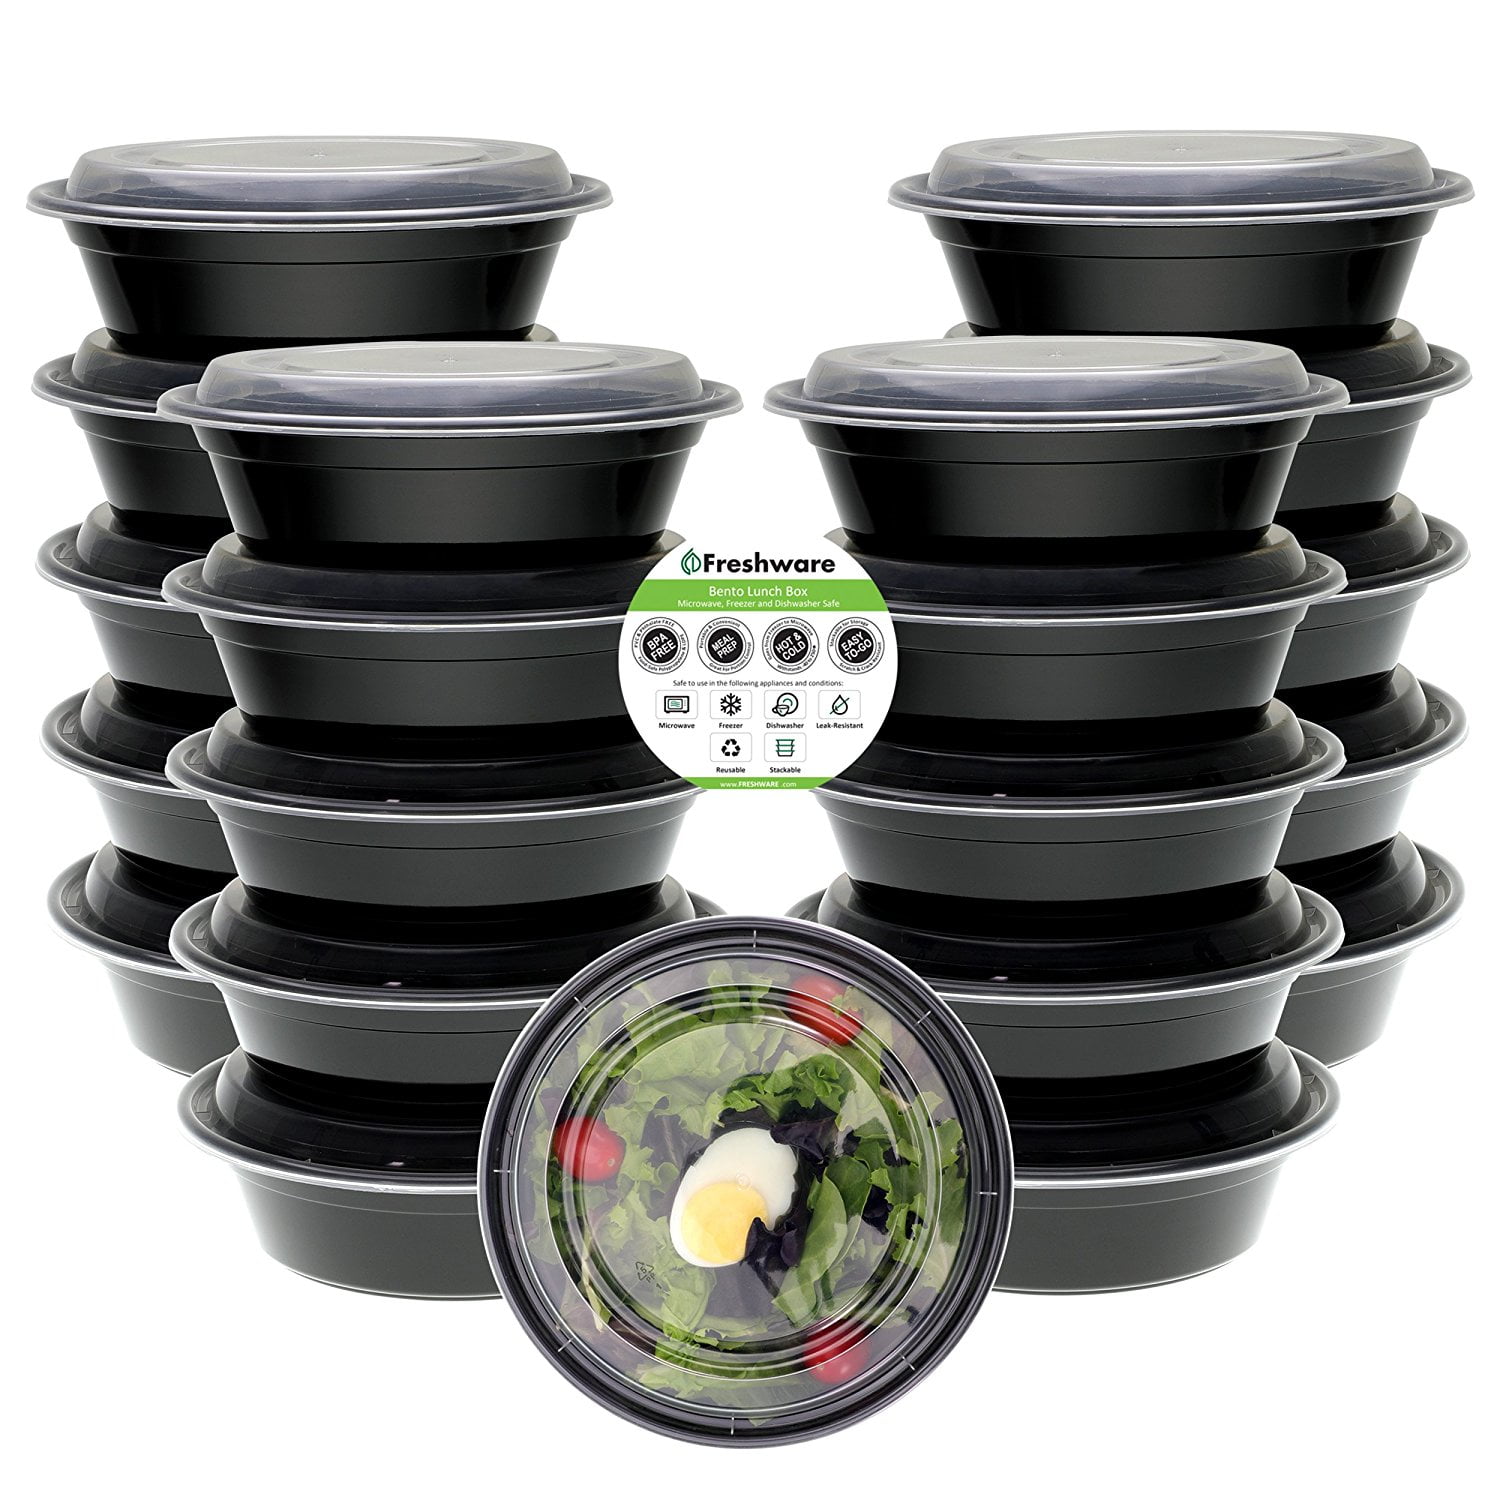 21 Pack 3 Compartment with Lids Food Storag... Freshware Meal Prep Containers